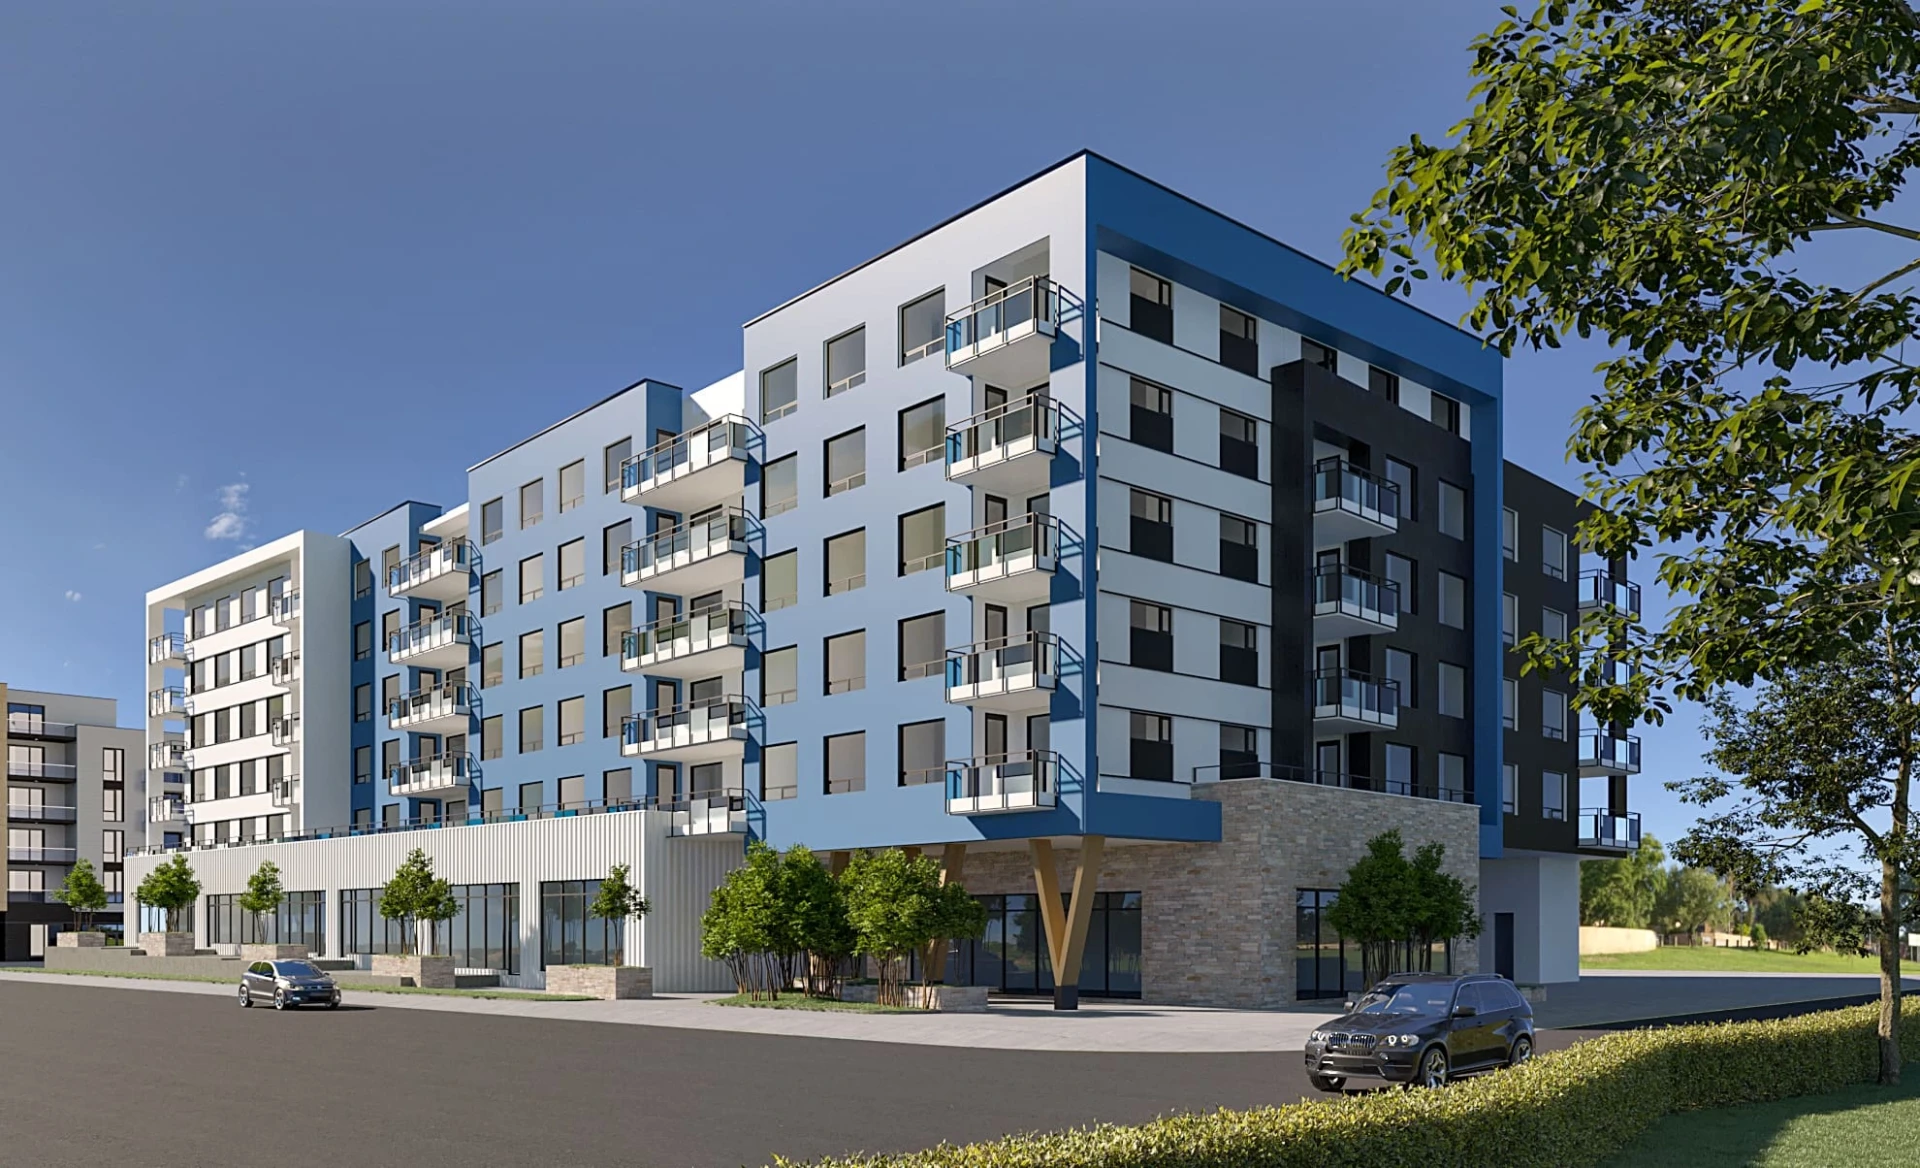 Lakeside West by Designated Developments is a mixed-use mid-rise with 78 condos.